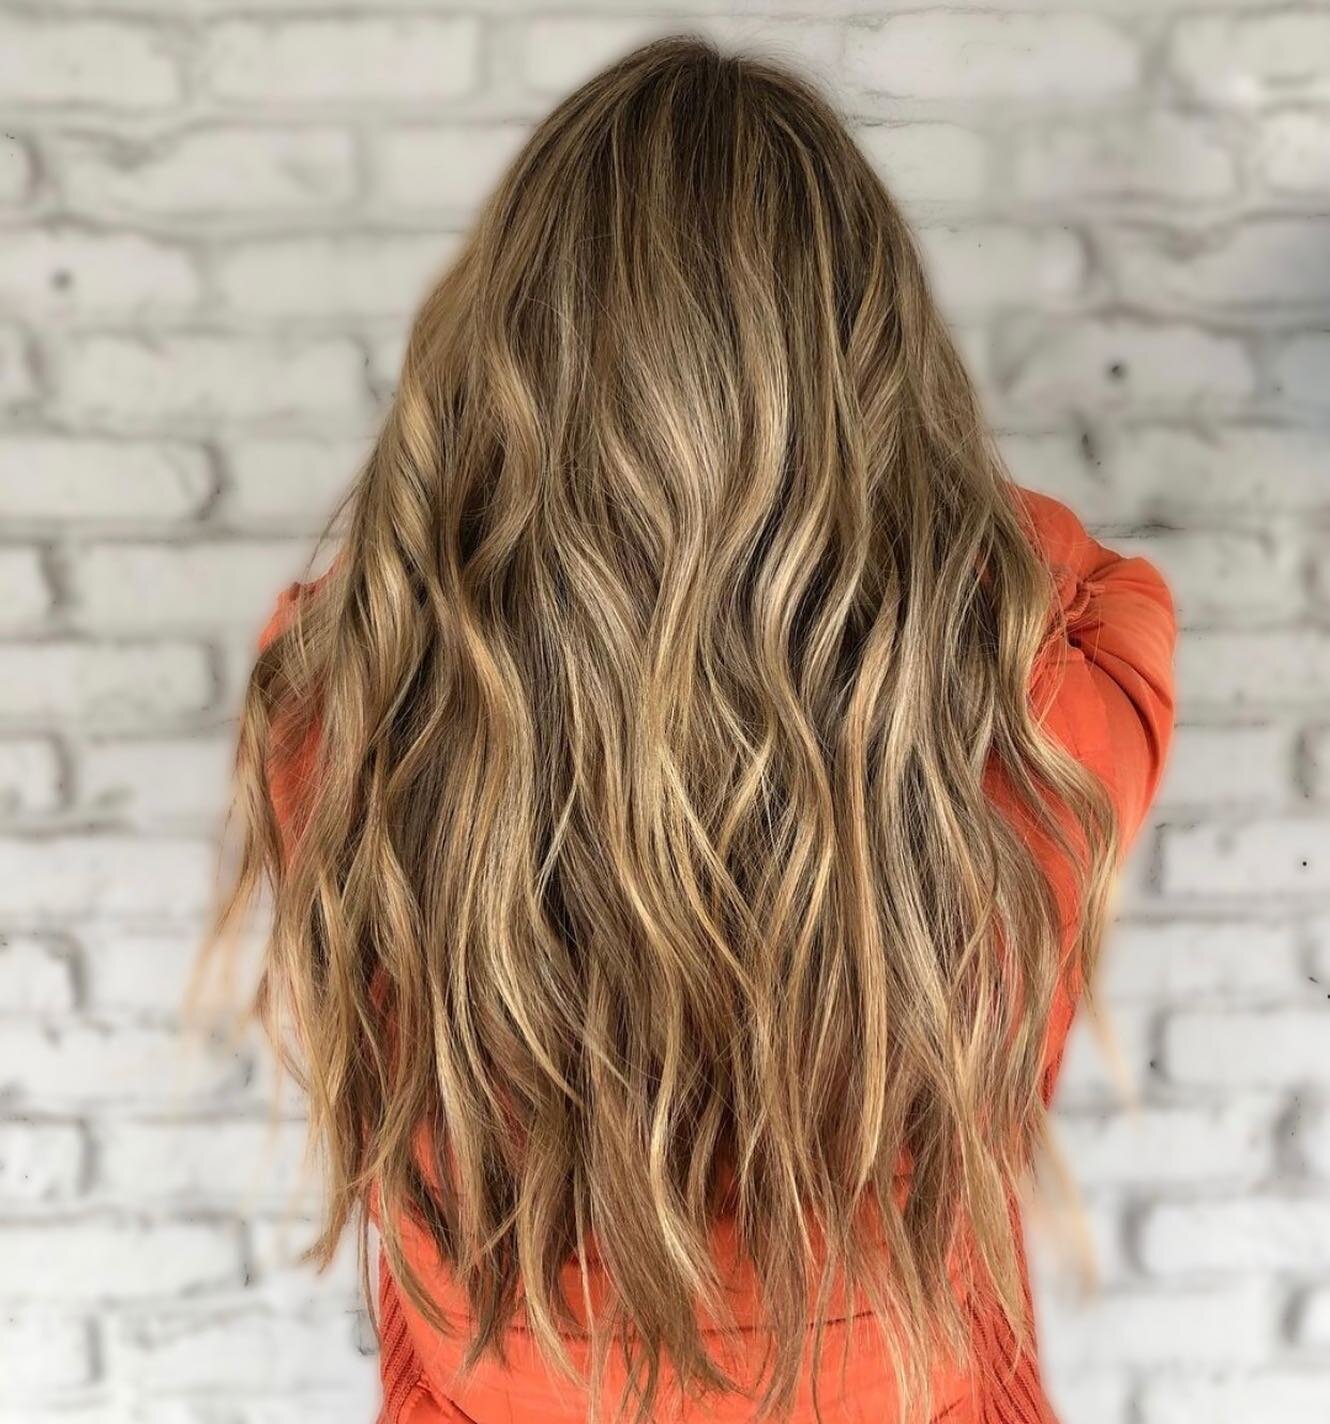 &ldquo;Hey Alexa, play &lsquo;Hey Now&rsquo; by Hilary Duff.&rdquo;
🎶 🎵 THIS IS WHAT DRREEEAAAAMMMS ARE MADE OF🎵🎶
I&rsquo;m obsessed with this color, the length, the fullness... By ✨ @kacie_lavishwayzata #hairenvy #foilage #paintedandfoiled #hair